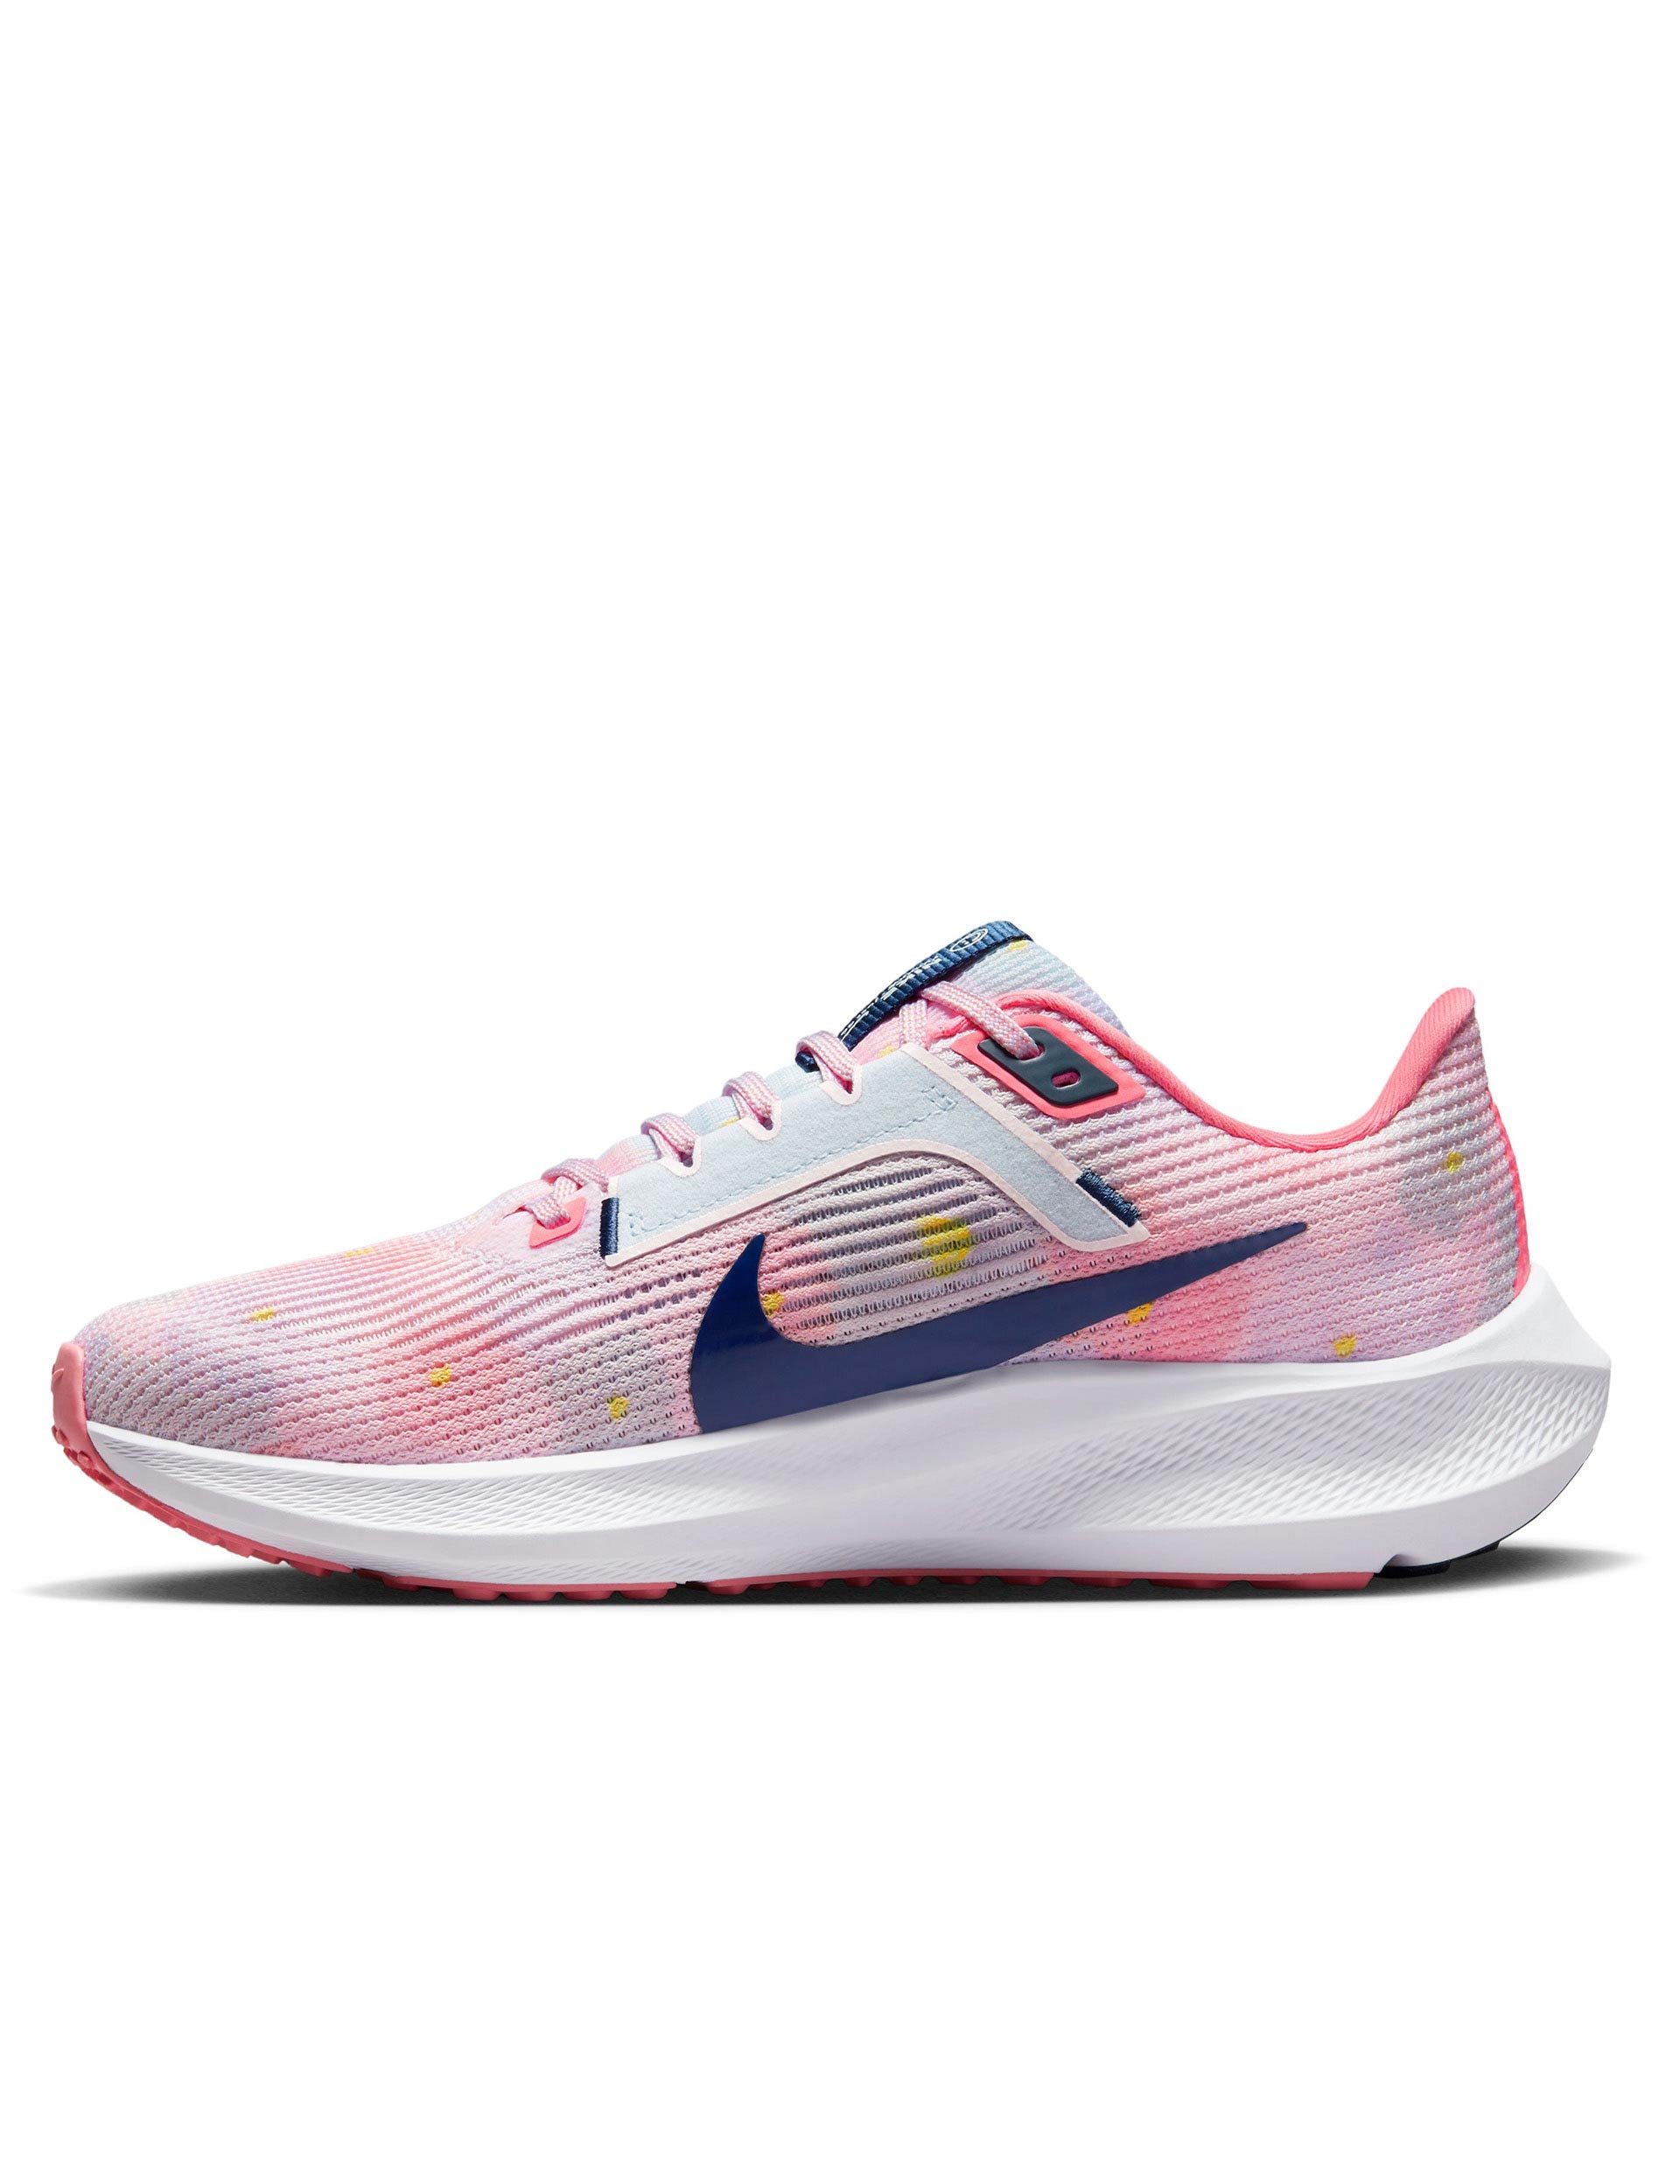 Nike Pegasus 40 Premium Shoes - Pearl Pink/Coral Chalk/White/Midnight Navyimages2- The Sports Edit